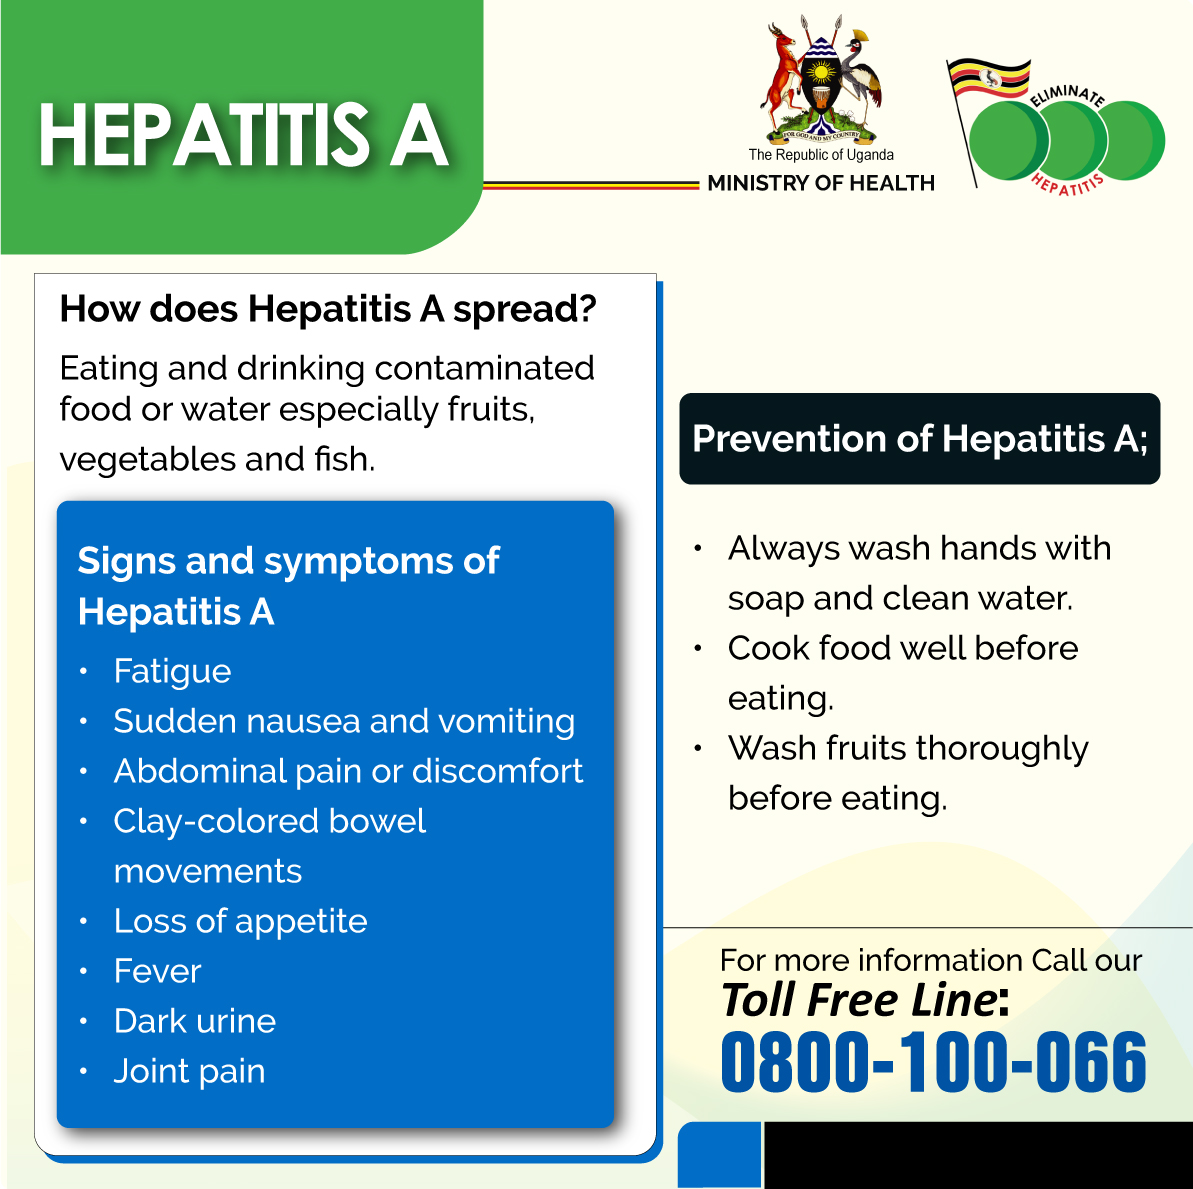 How does Hepatitis A spread